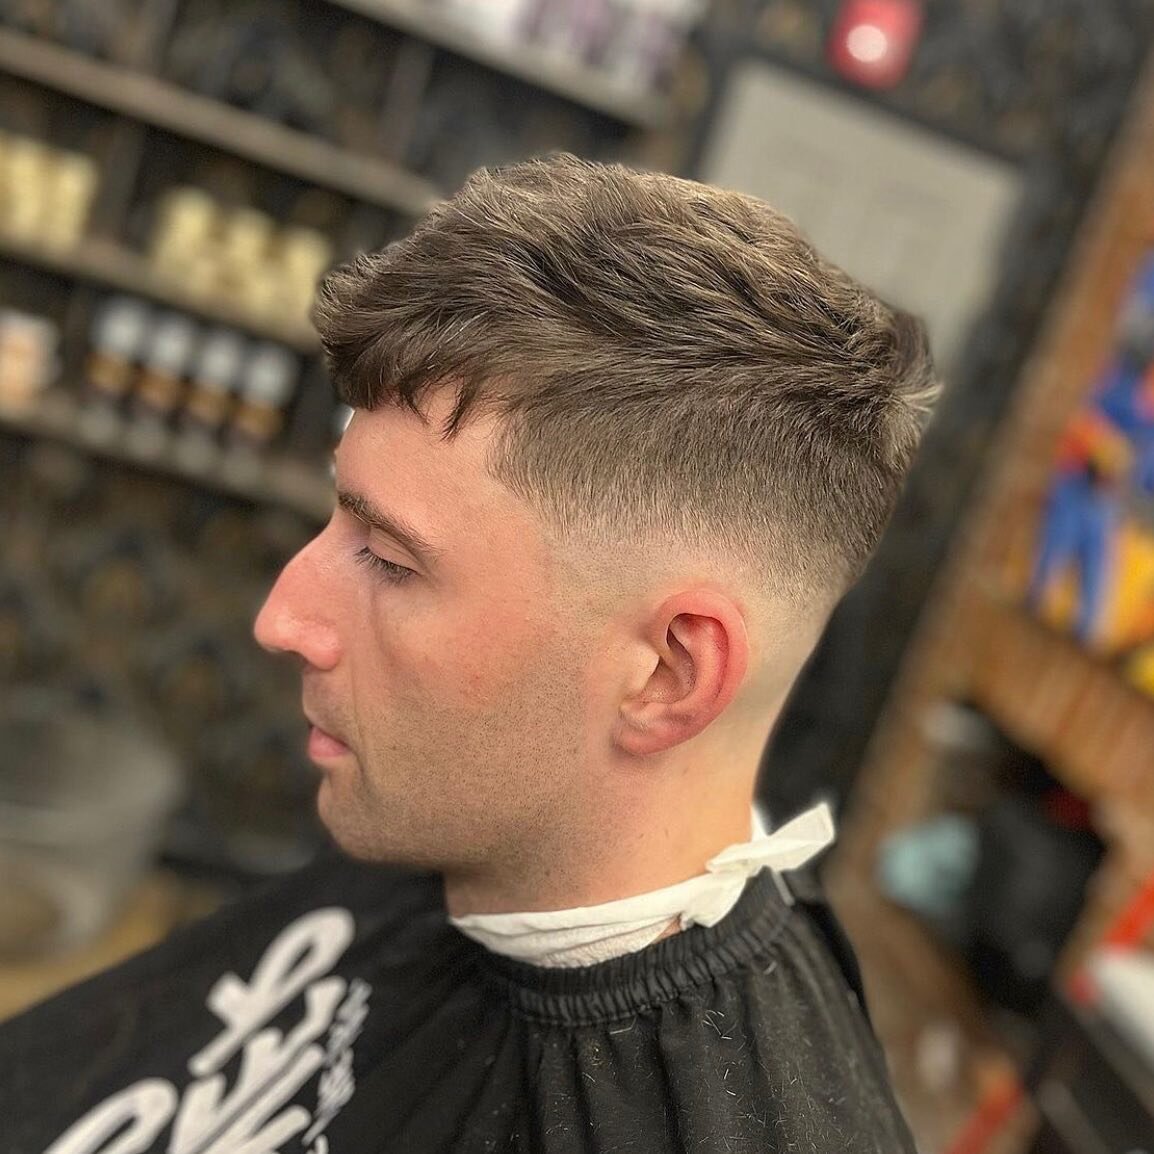 If your reading this, drop a 🙌🏼 in the comments for Jessa. 

#BestHaircutEver #PhillysBestBarber #PhillyBarber #PhillyBarbers #PhillyBarbershop #Philly #phillyhair #Philadelphia #barbers #barbering #barberlove #traditionalbarber #barberlife  #mensh